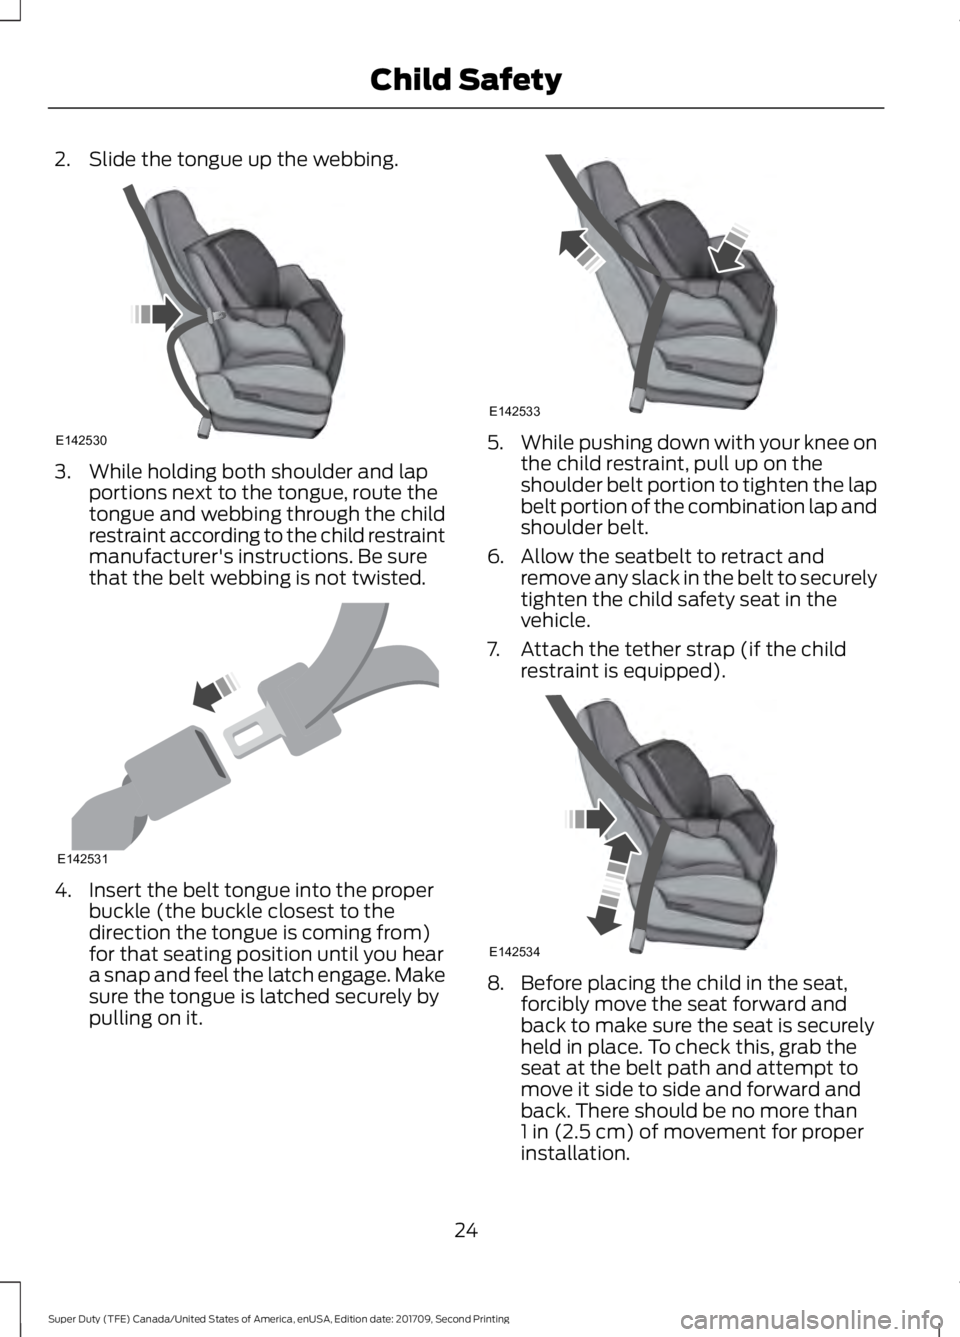 FORD F-450 2018  Owners Manual 2. Slide the tongue up the webbing.
3. While holding both shoulder and lap
portions next to the tongue, route the
tongue and webbing through the child
restraint according to the child restraint
manufa